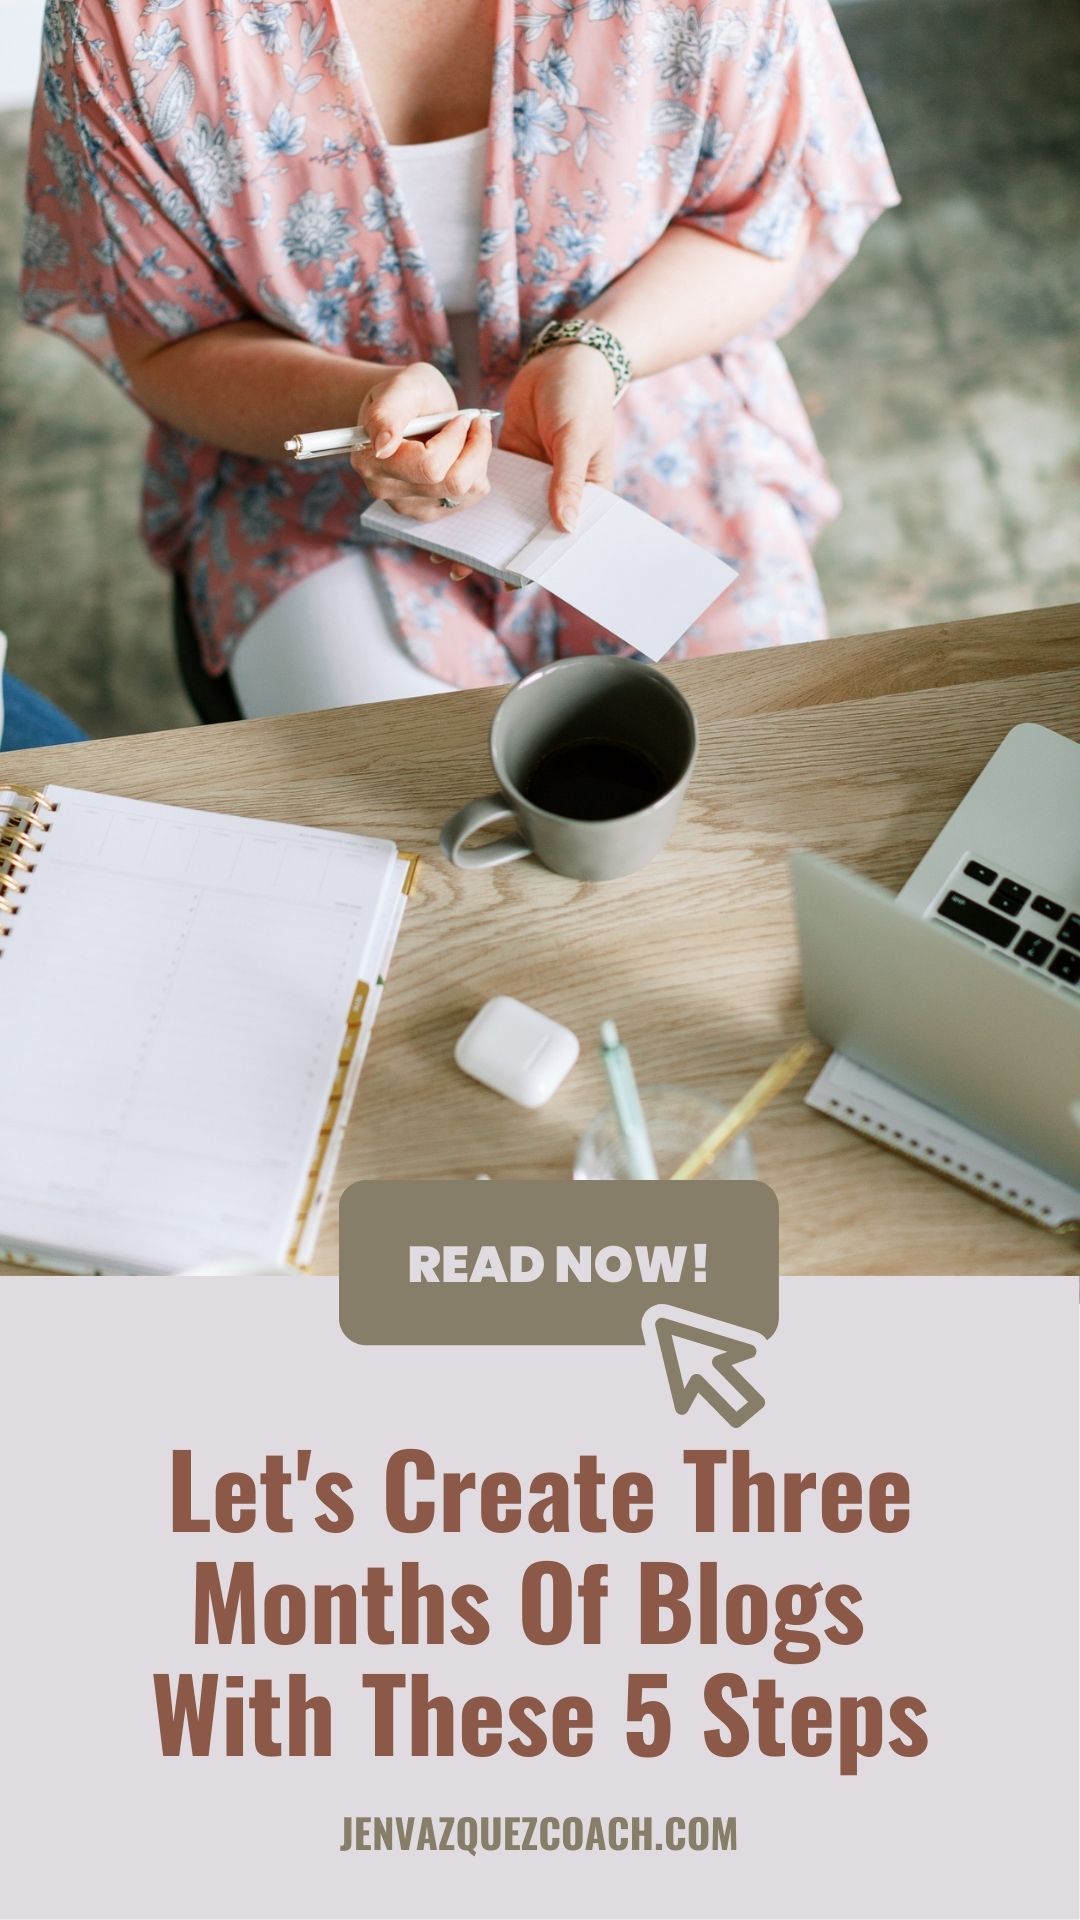 Let's Create Three Months of Blogs in 5 Steps